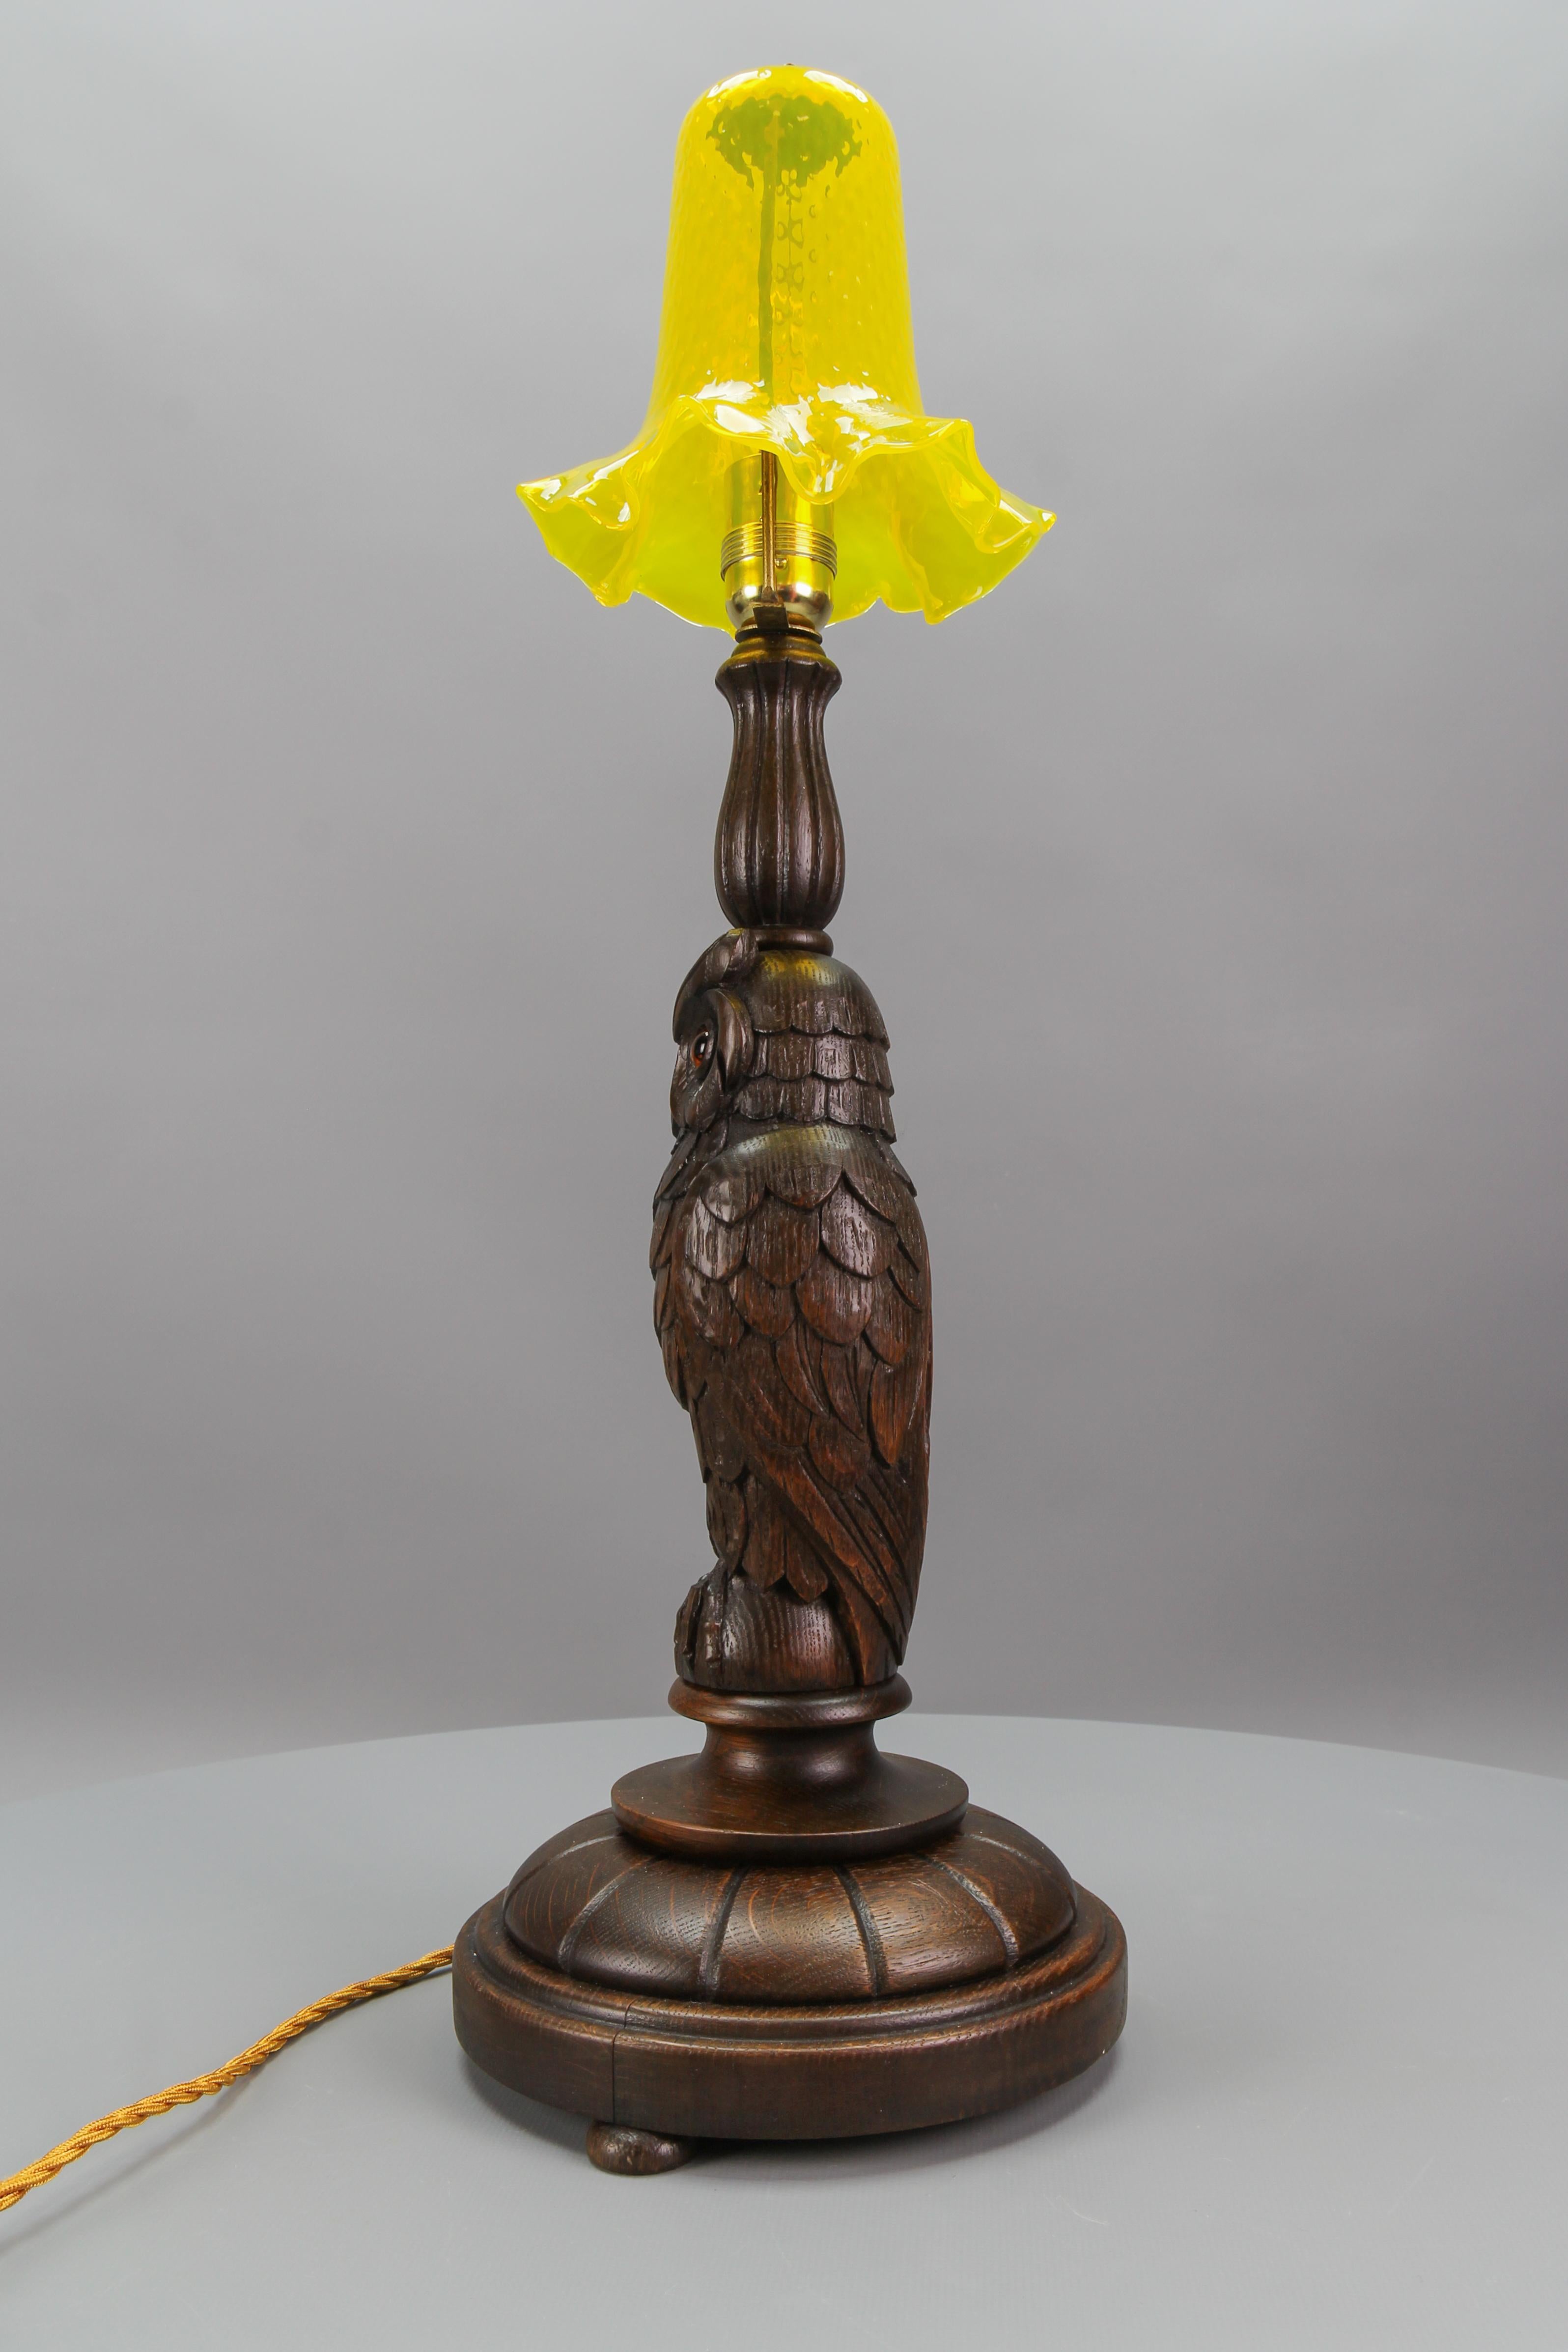 Art Deco Table Lamp with Owl Sculpture and Yellow Glass Lampshade, ca. 1920 For Sale 12